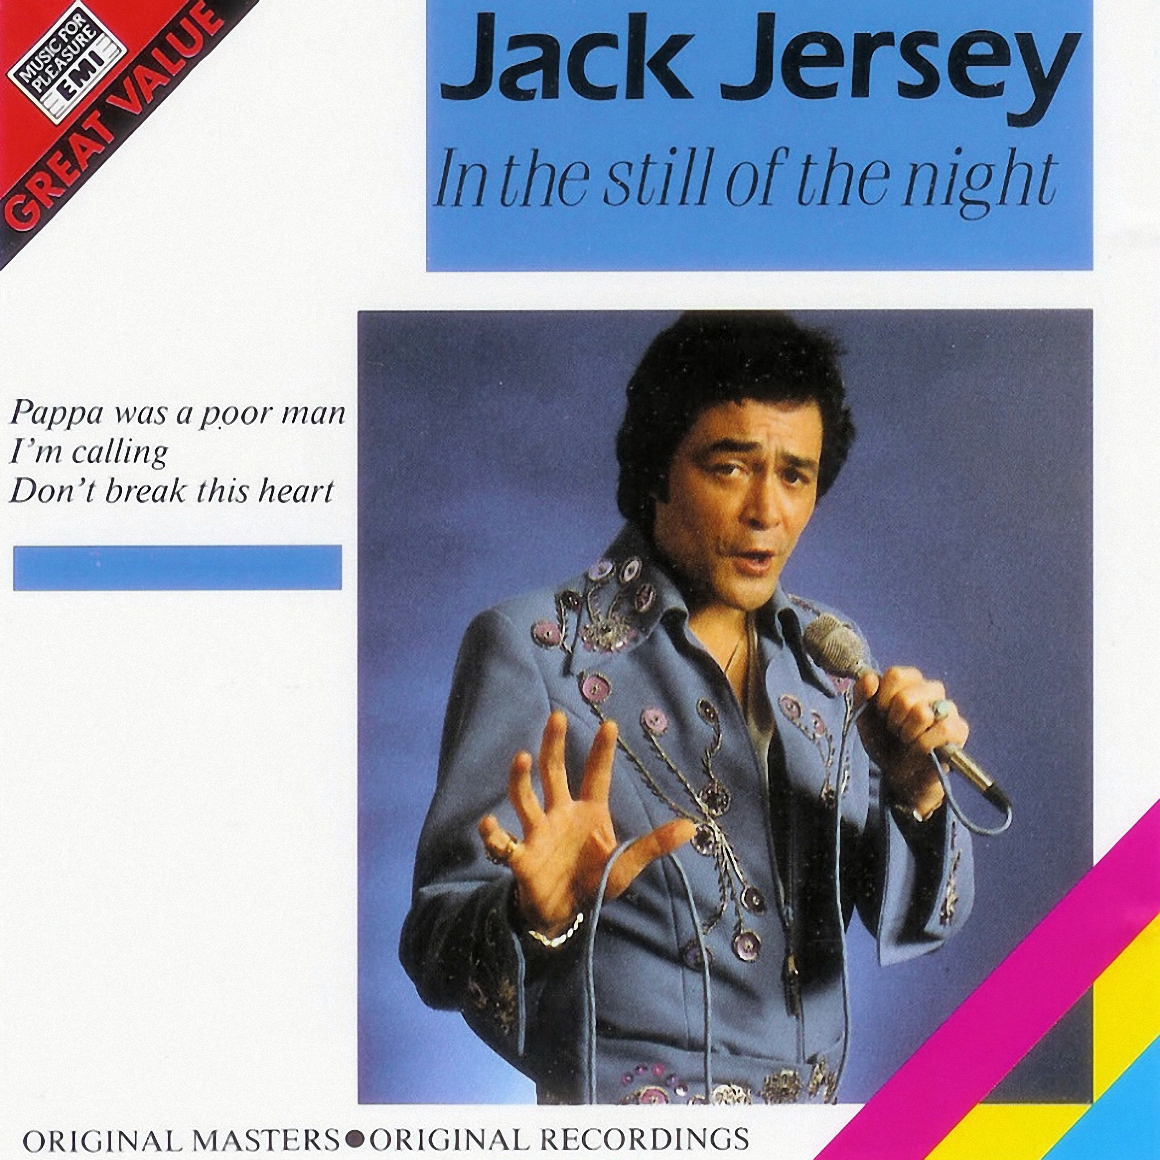 Jack Jersey - Collection (1975-2009)